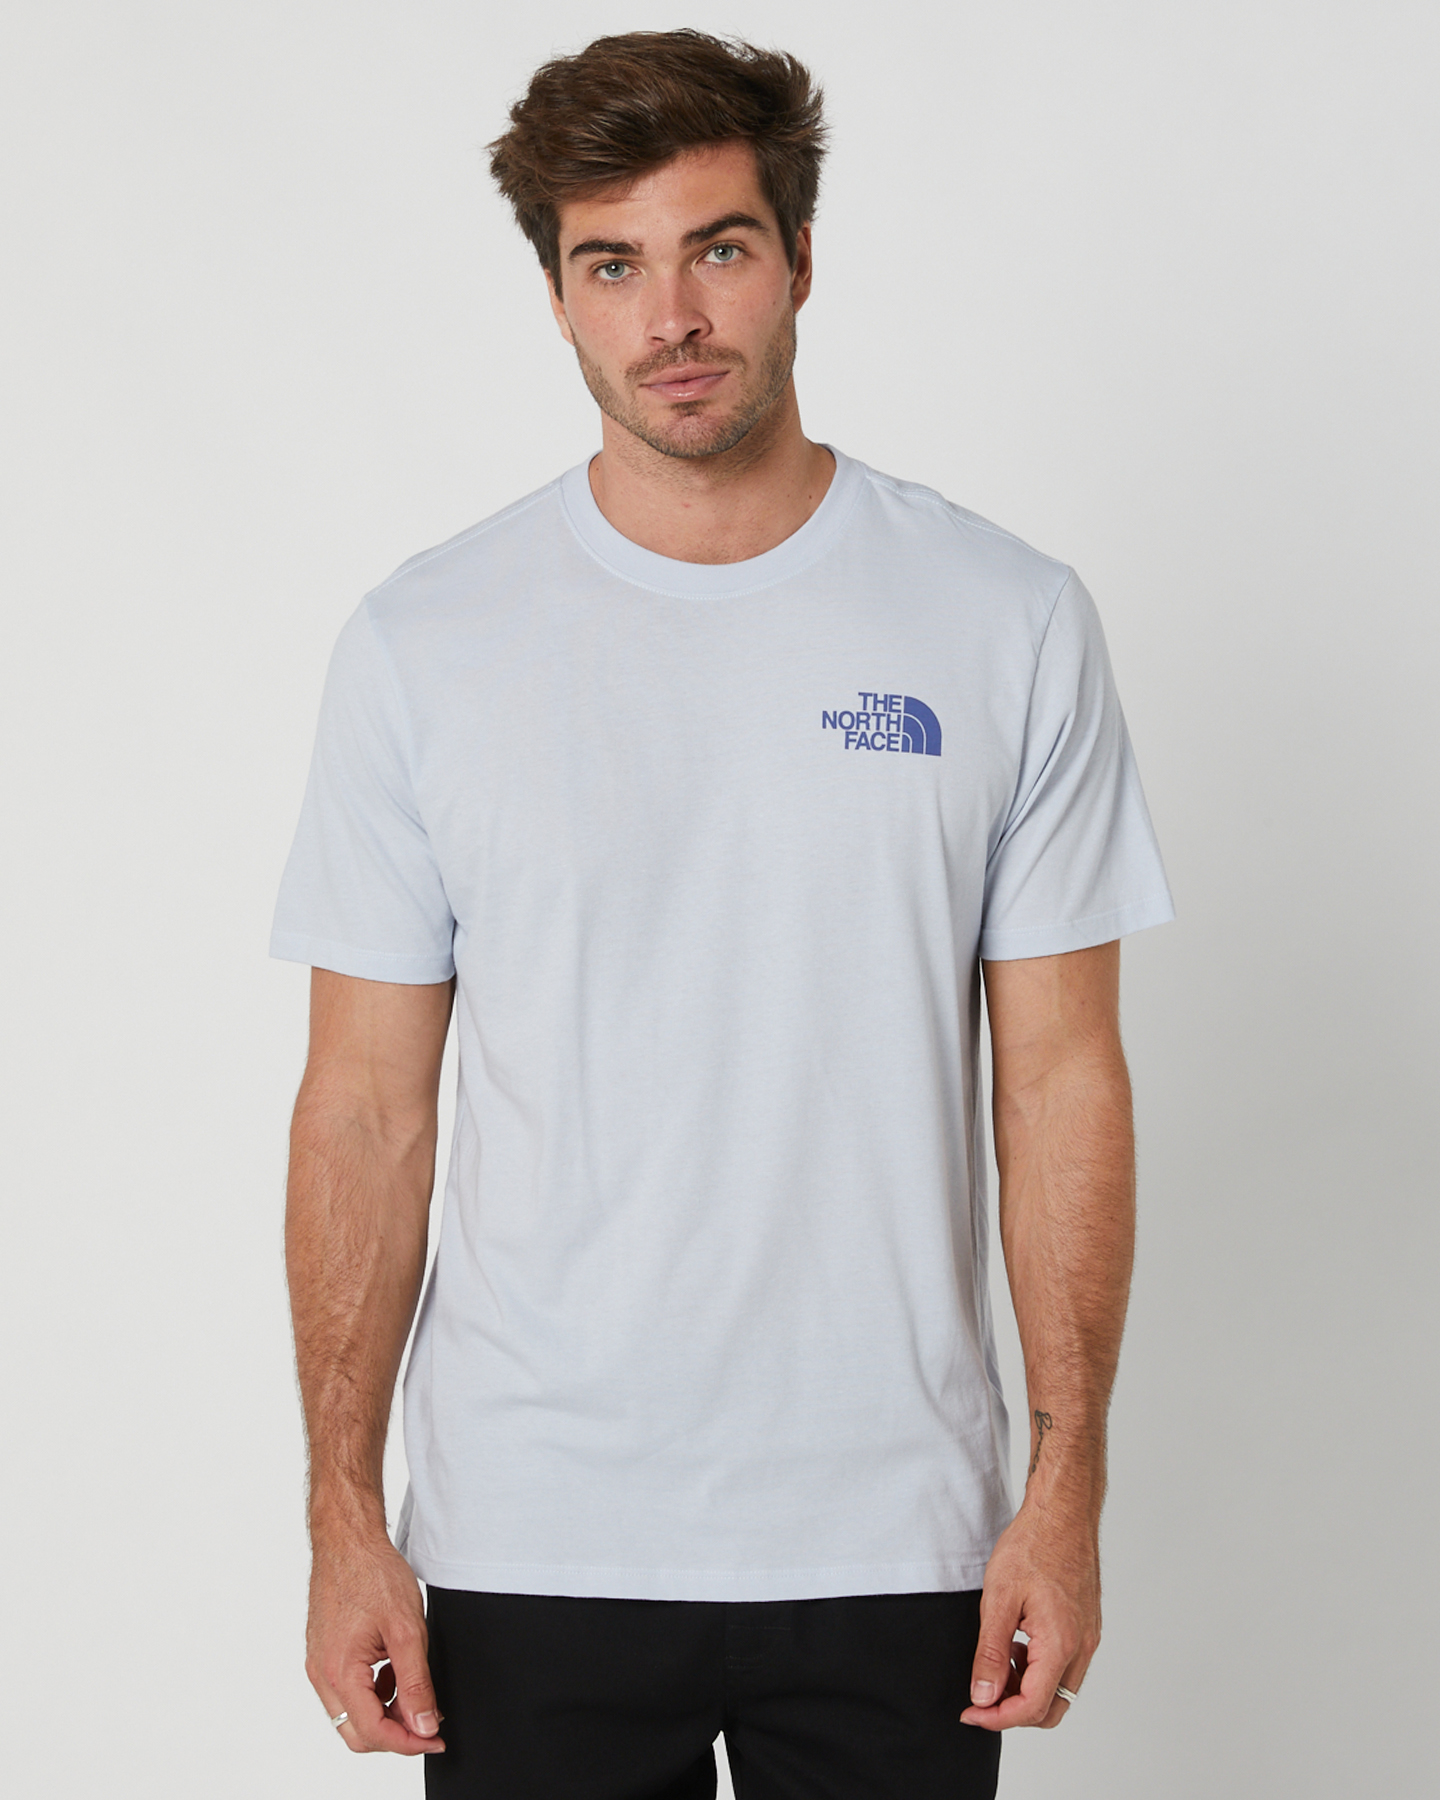 Periwinkle Dusty - Mens | Face North Love The SurfStitch We Tee Short-Sleeve Places